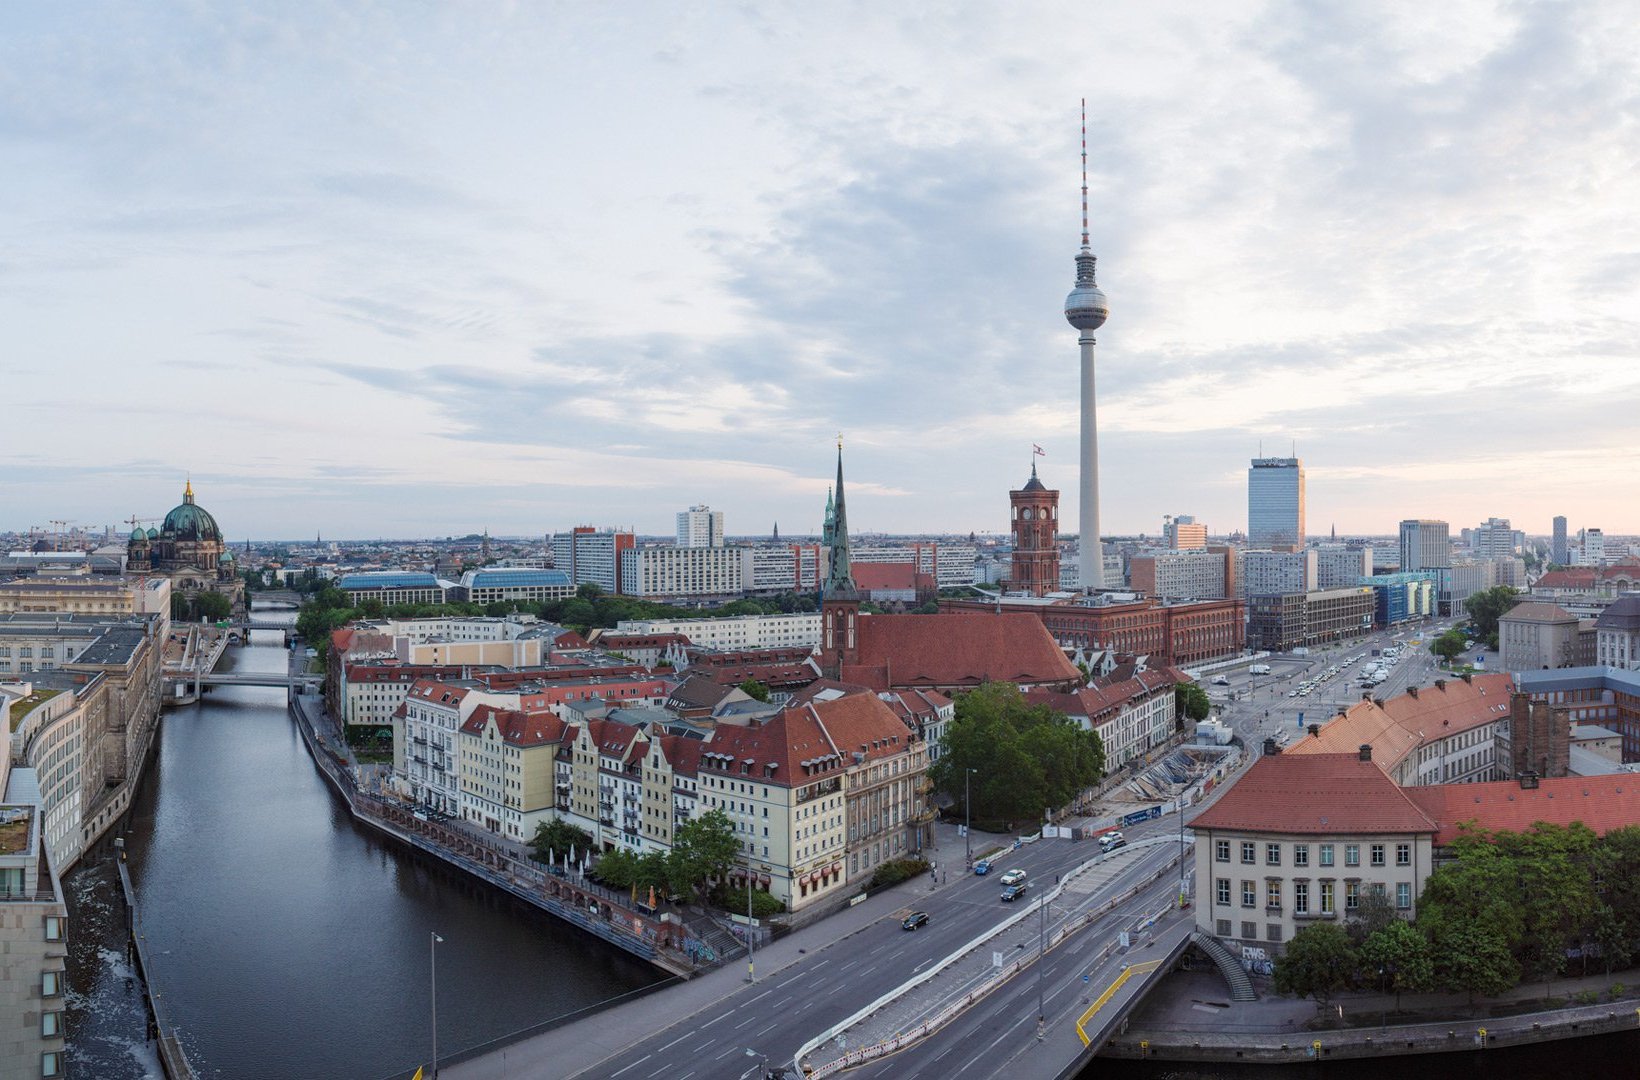 The city of Berlin with the television tower